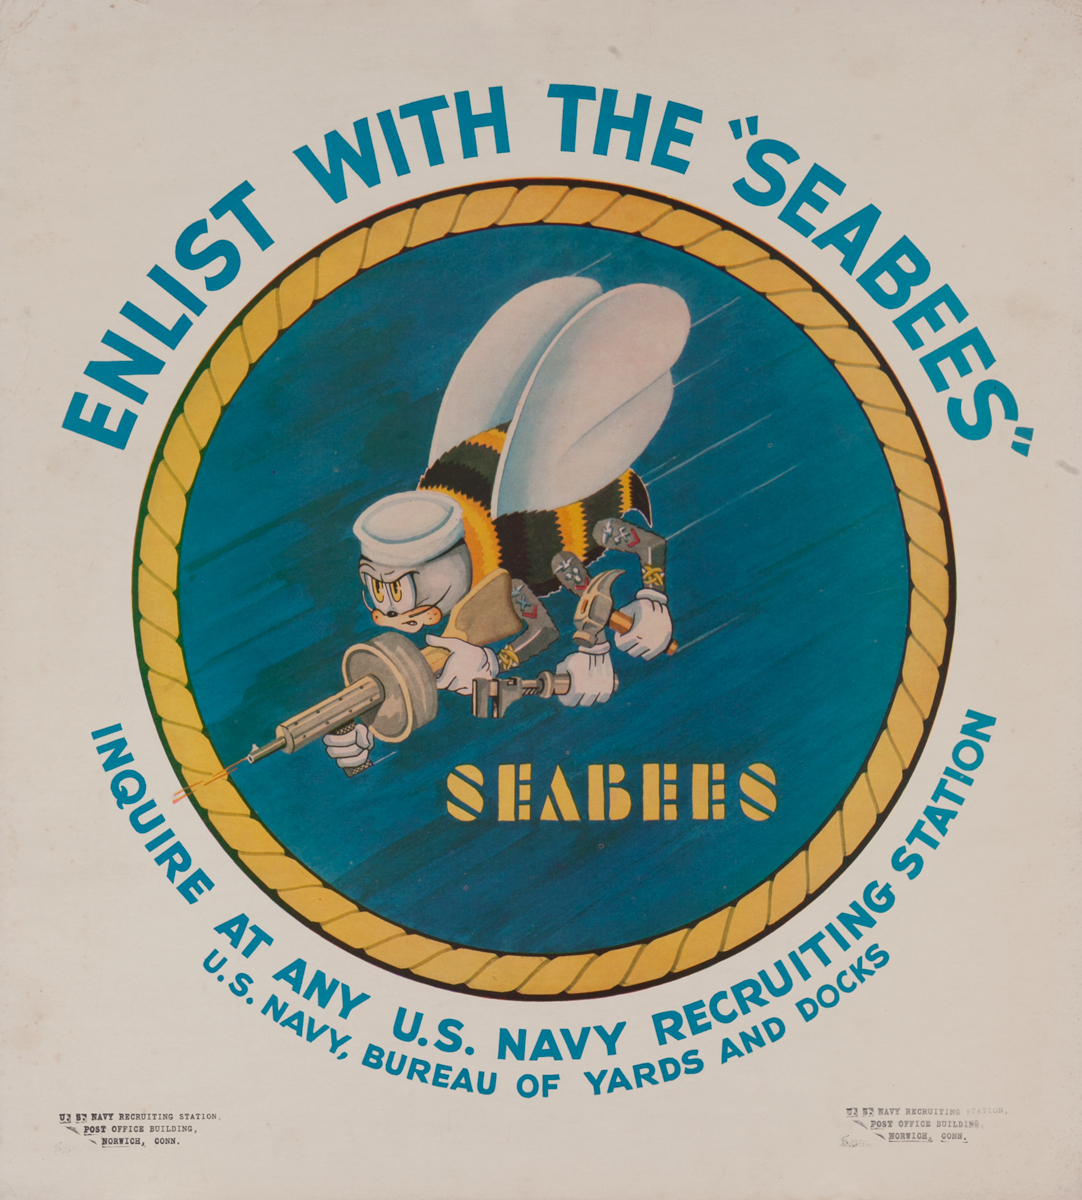 Enlist With The Seabees Original American WWII Recruiting Poster